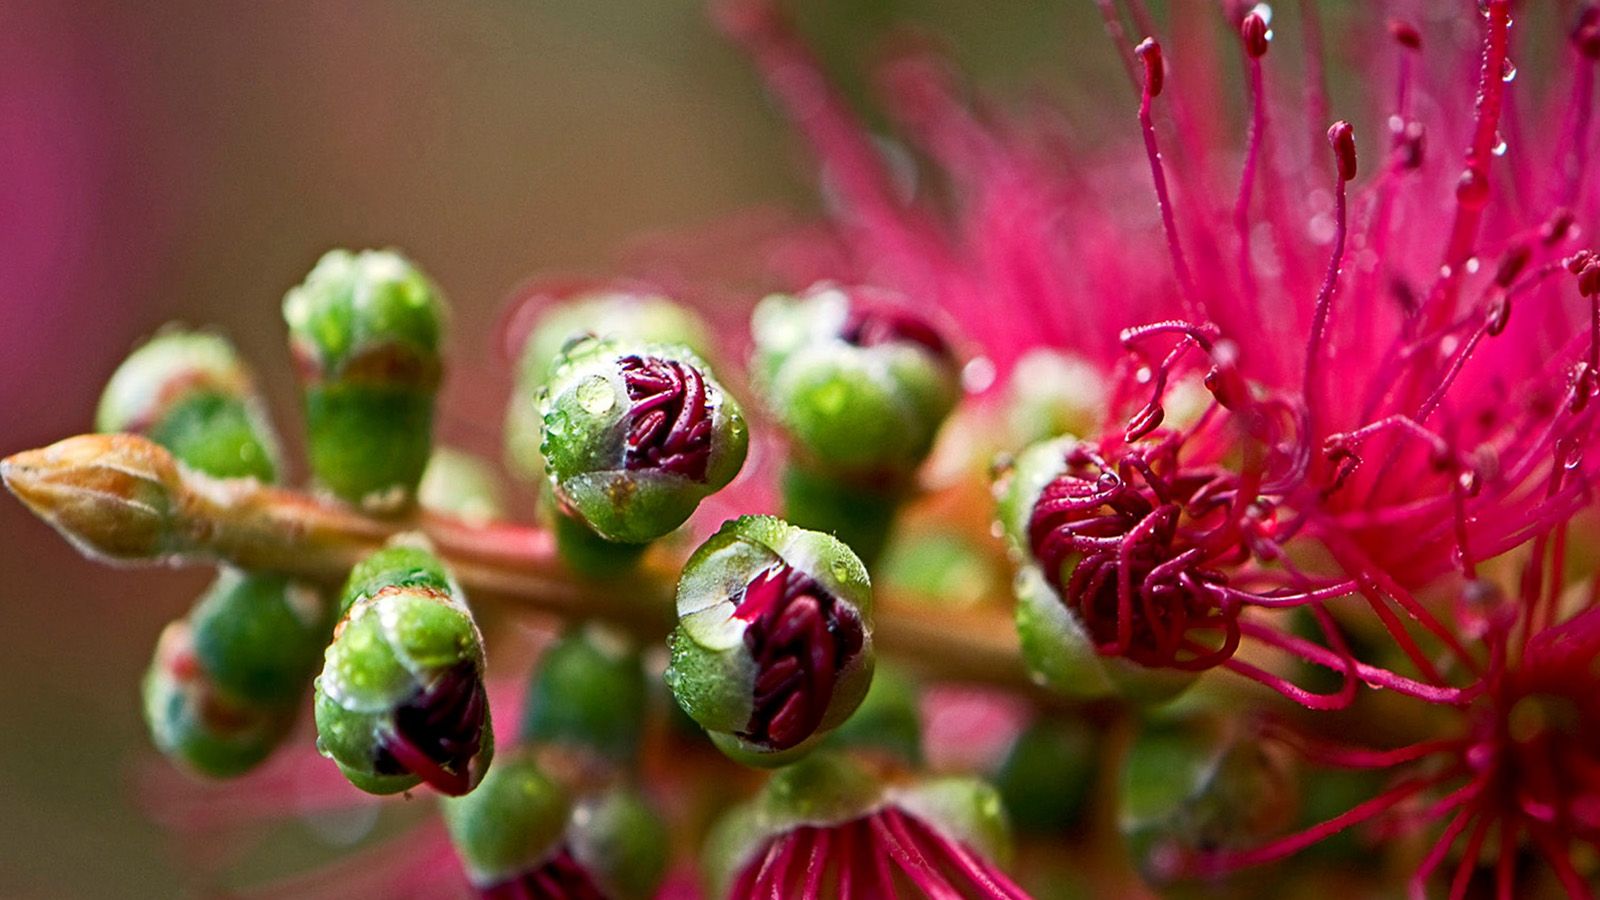 Close up photograph of a vibrant pink flower and seed buds banner image